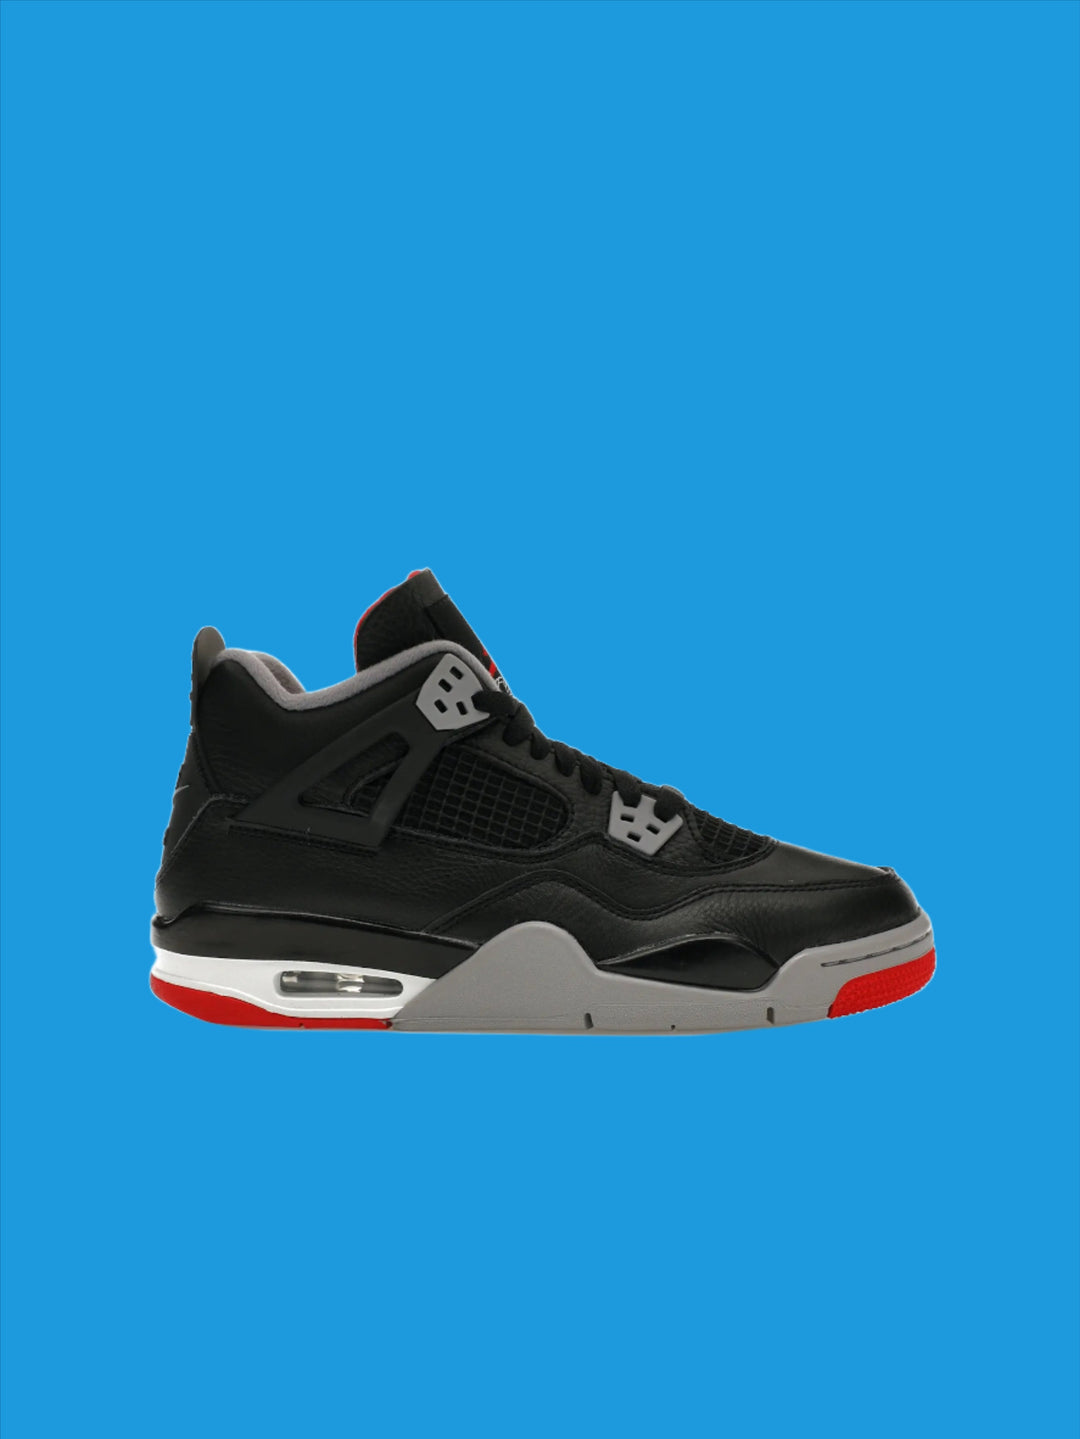 Nike Air Jordan 4 Retro Bred Reimagined (GS) in Auckland, New Zealand - Shop name